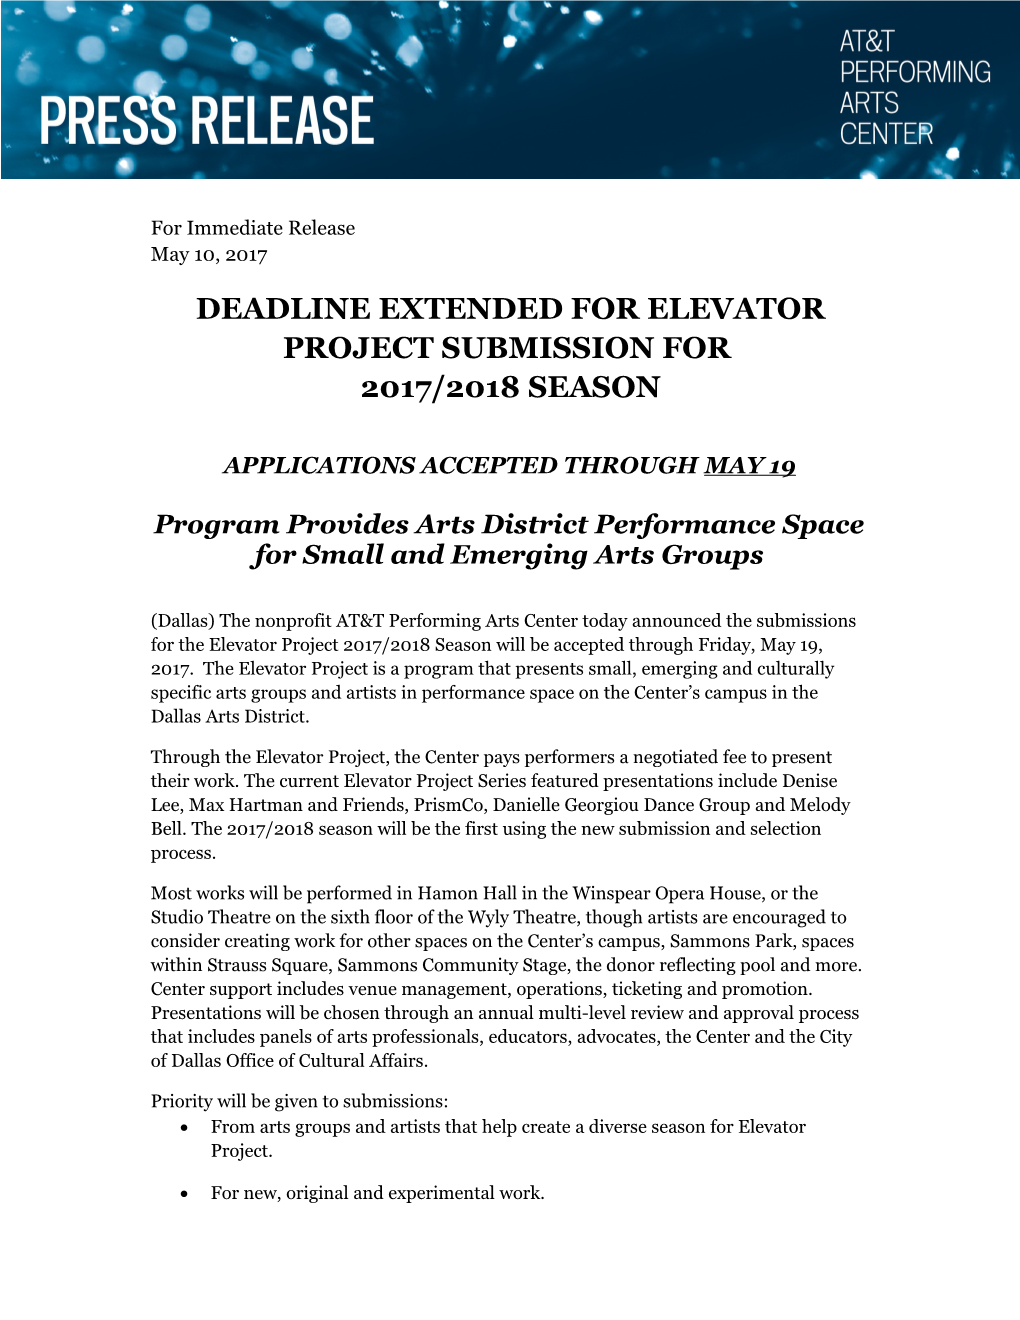 Deadline Extended for Elevator Project Submission For